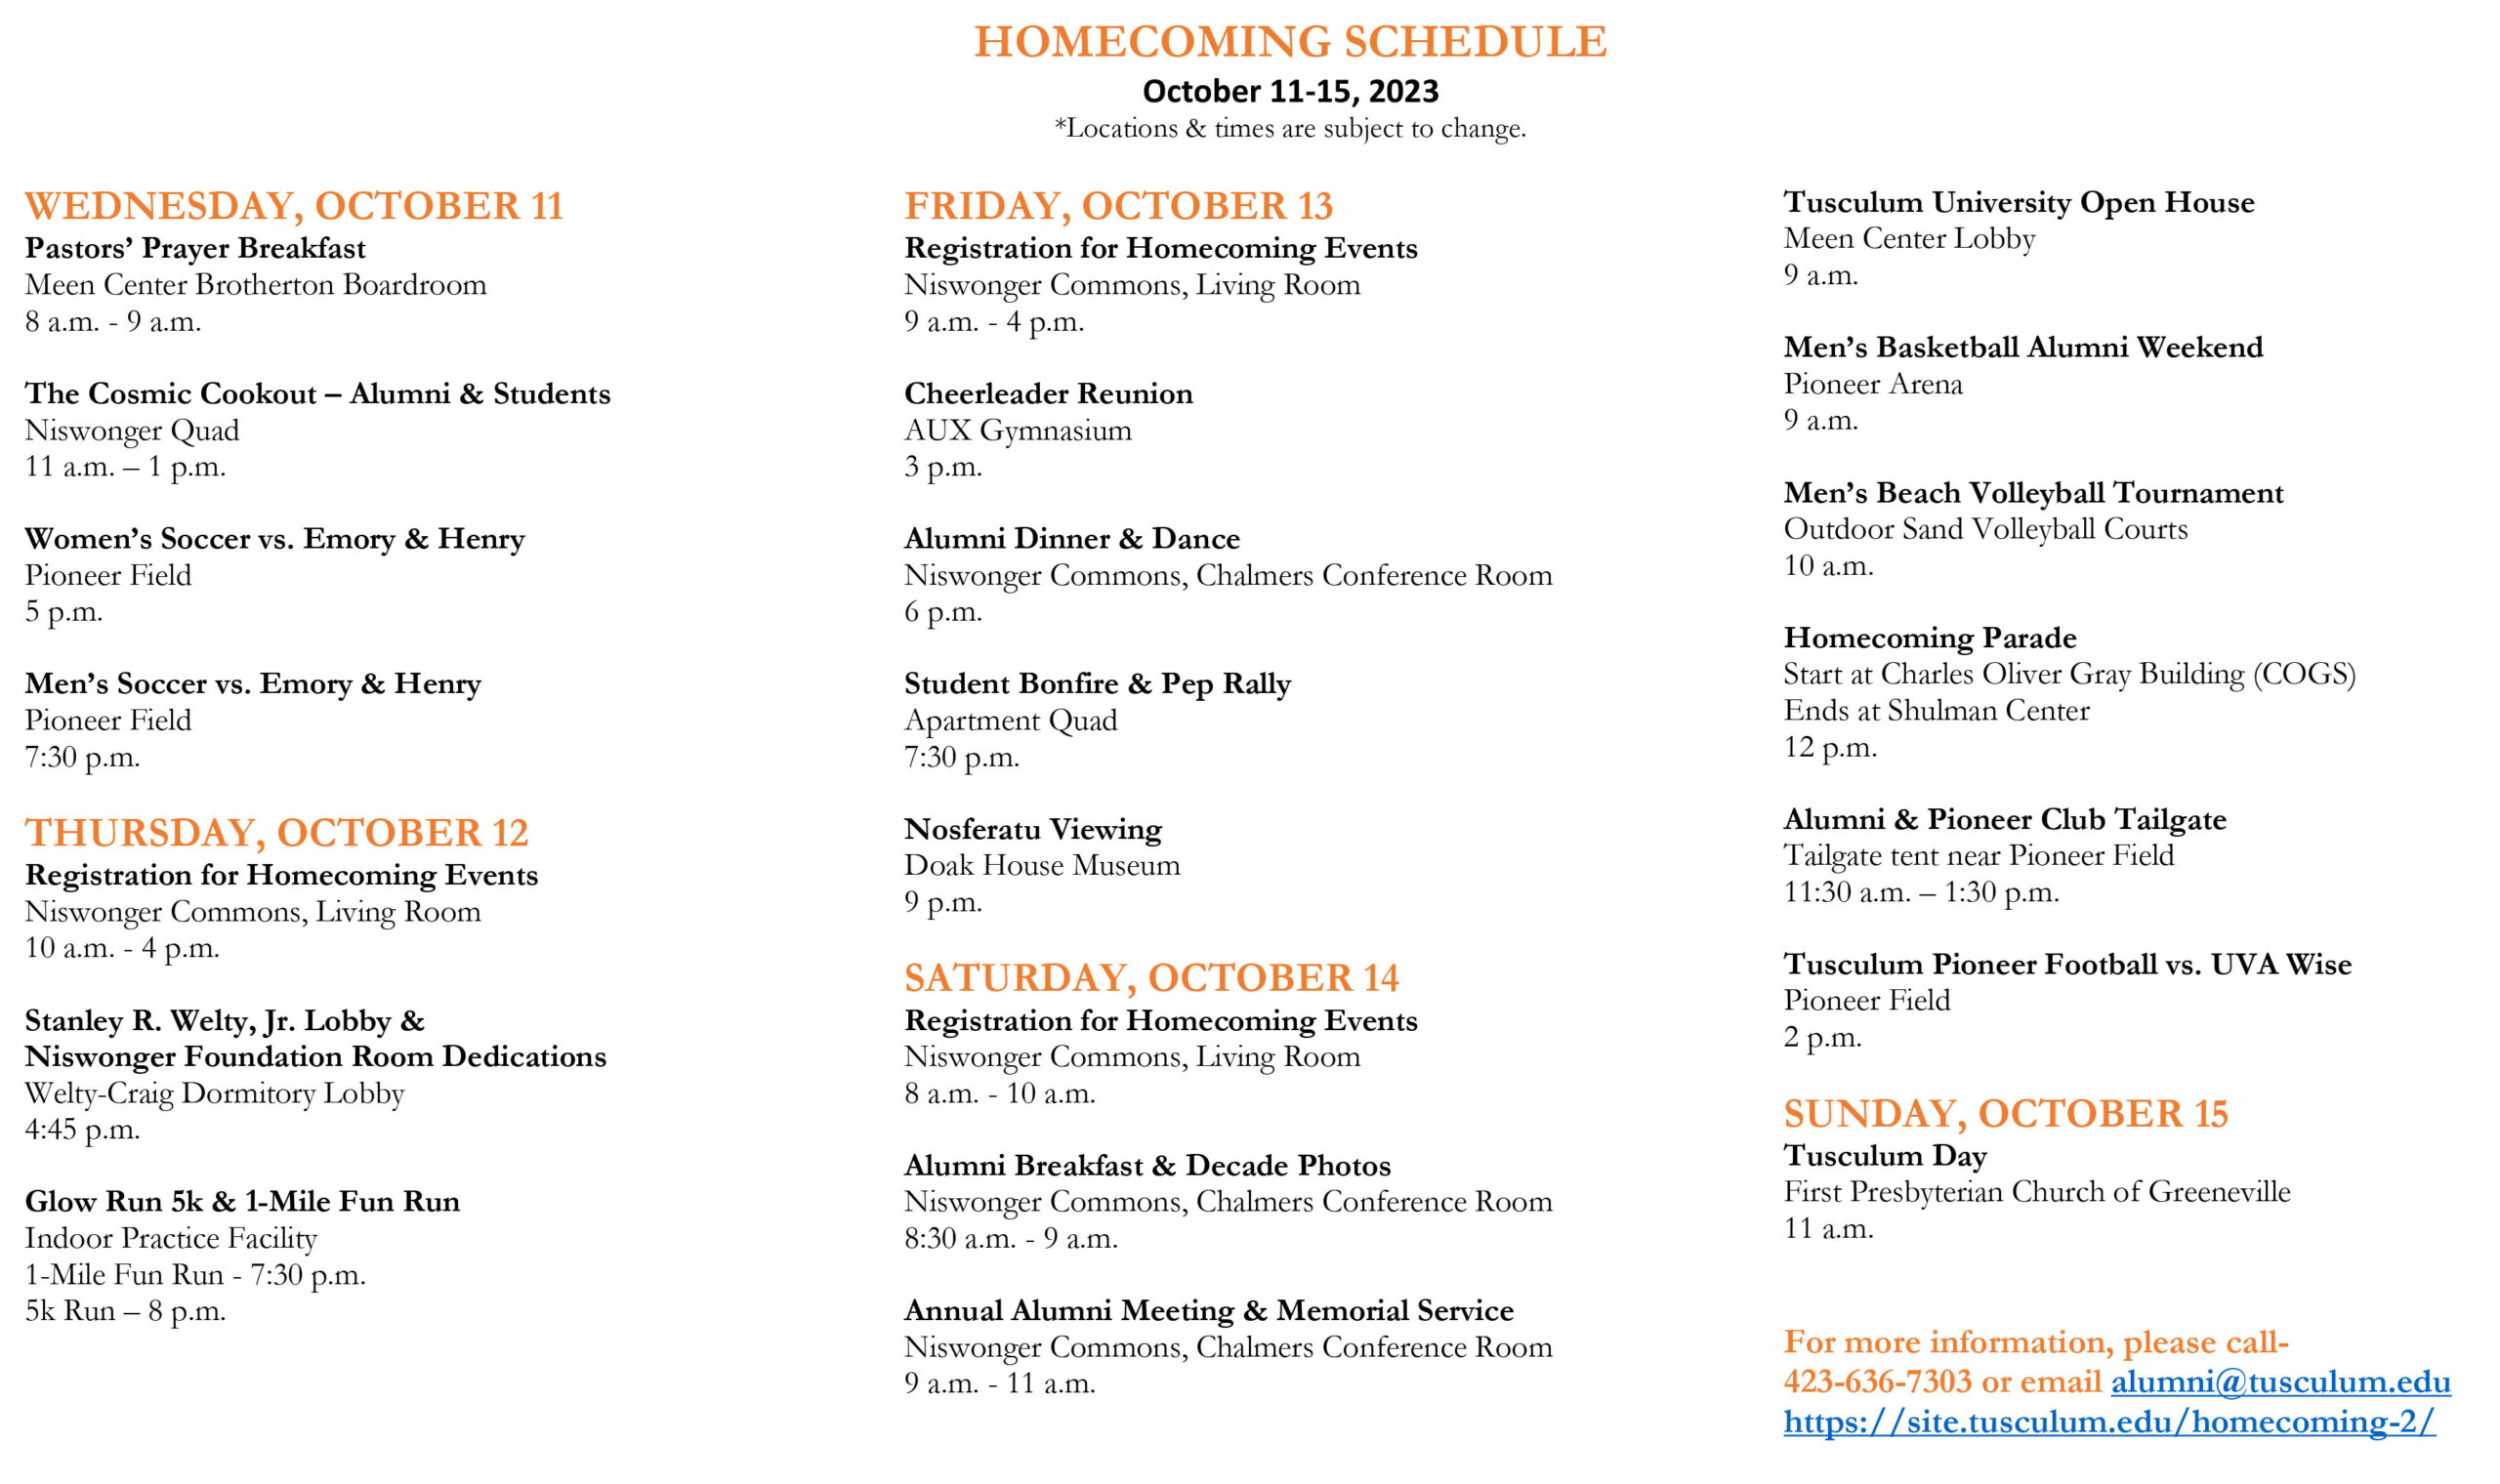 Homecoming Schedule 2023 Information